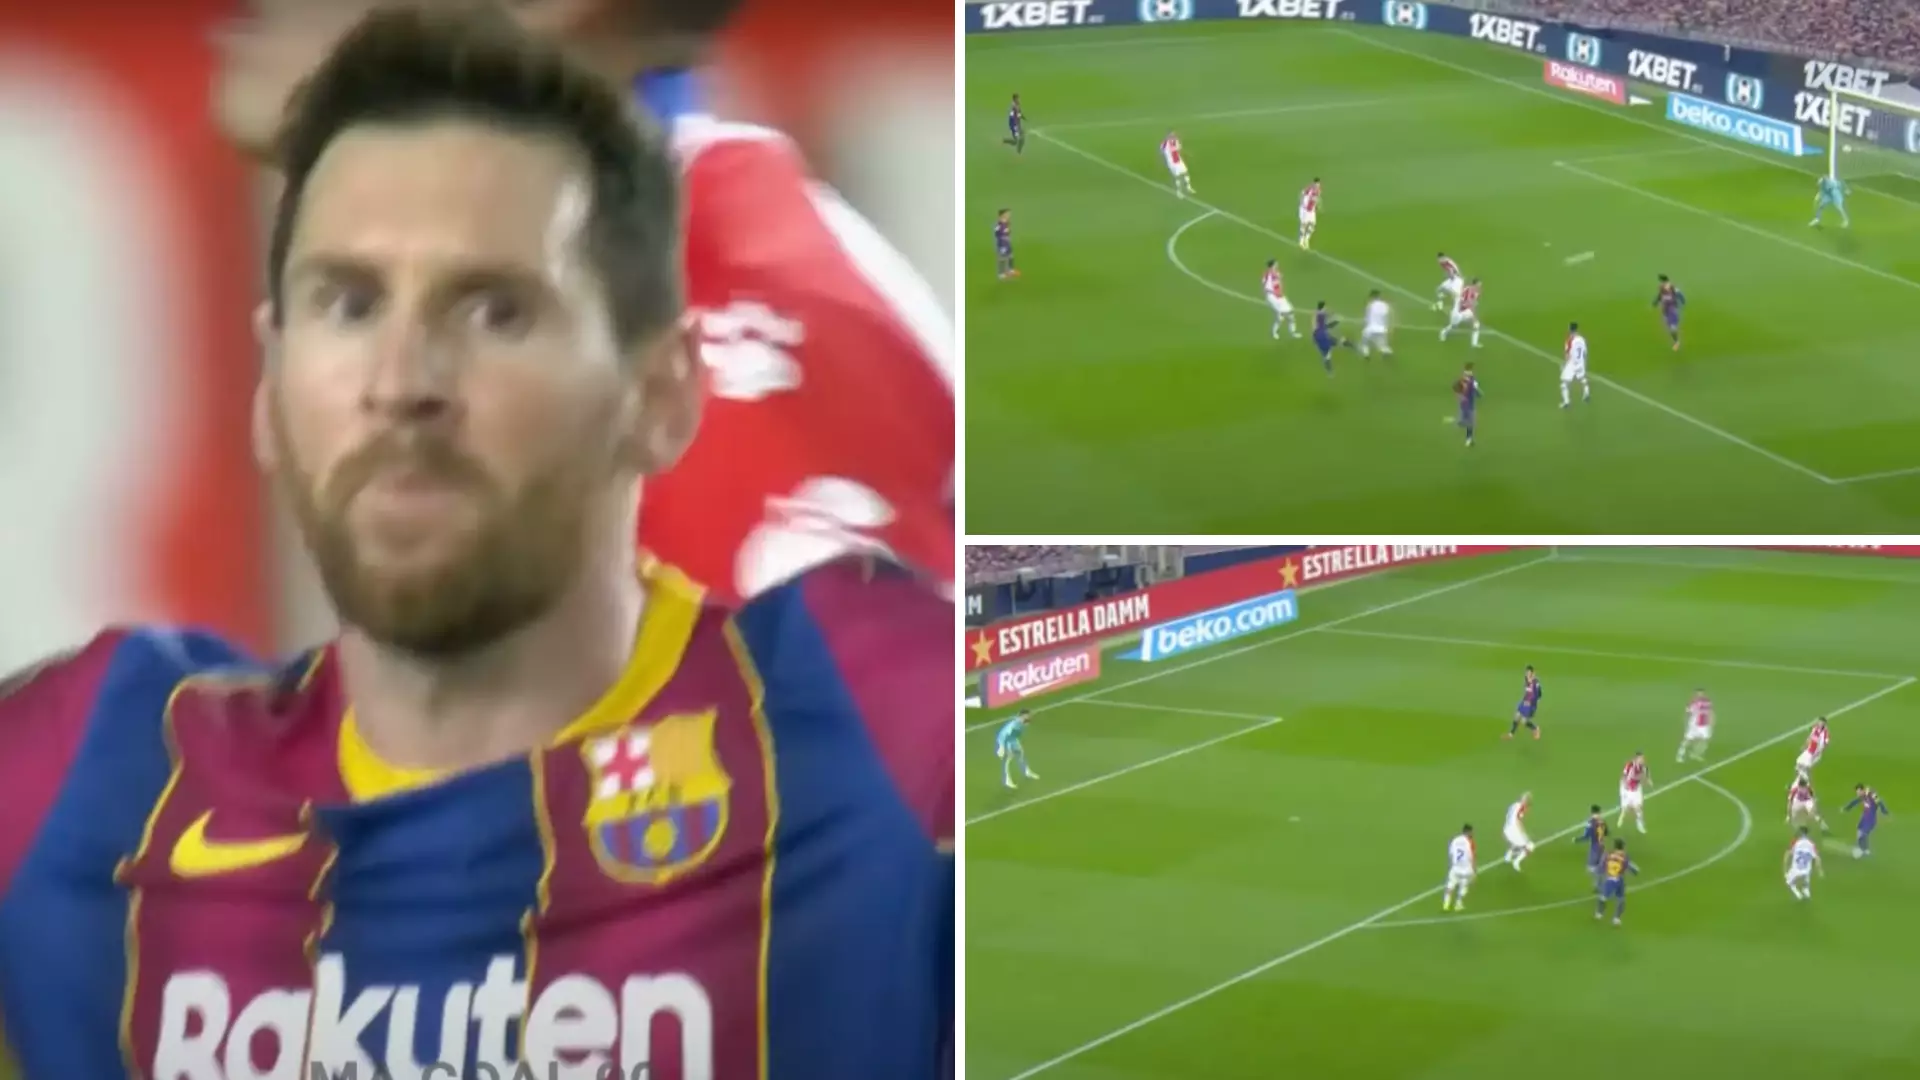 Lionel Messi’s Stunning Highlights For Barcelona Against Alaves Emerge Online Ahead Of PSG Clash